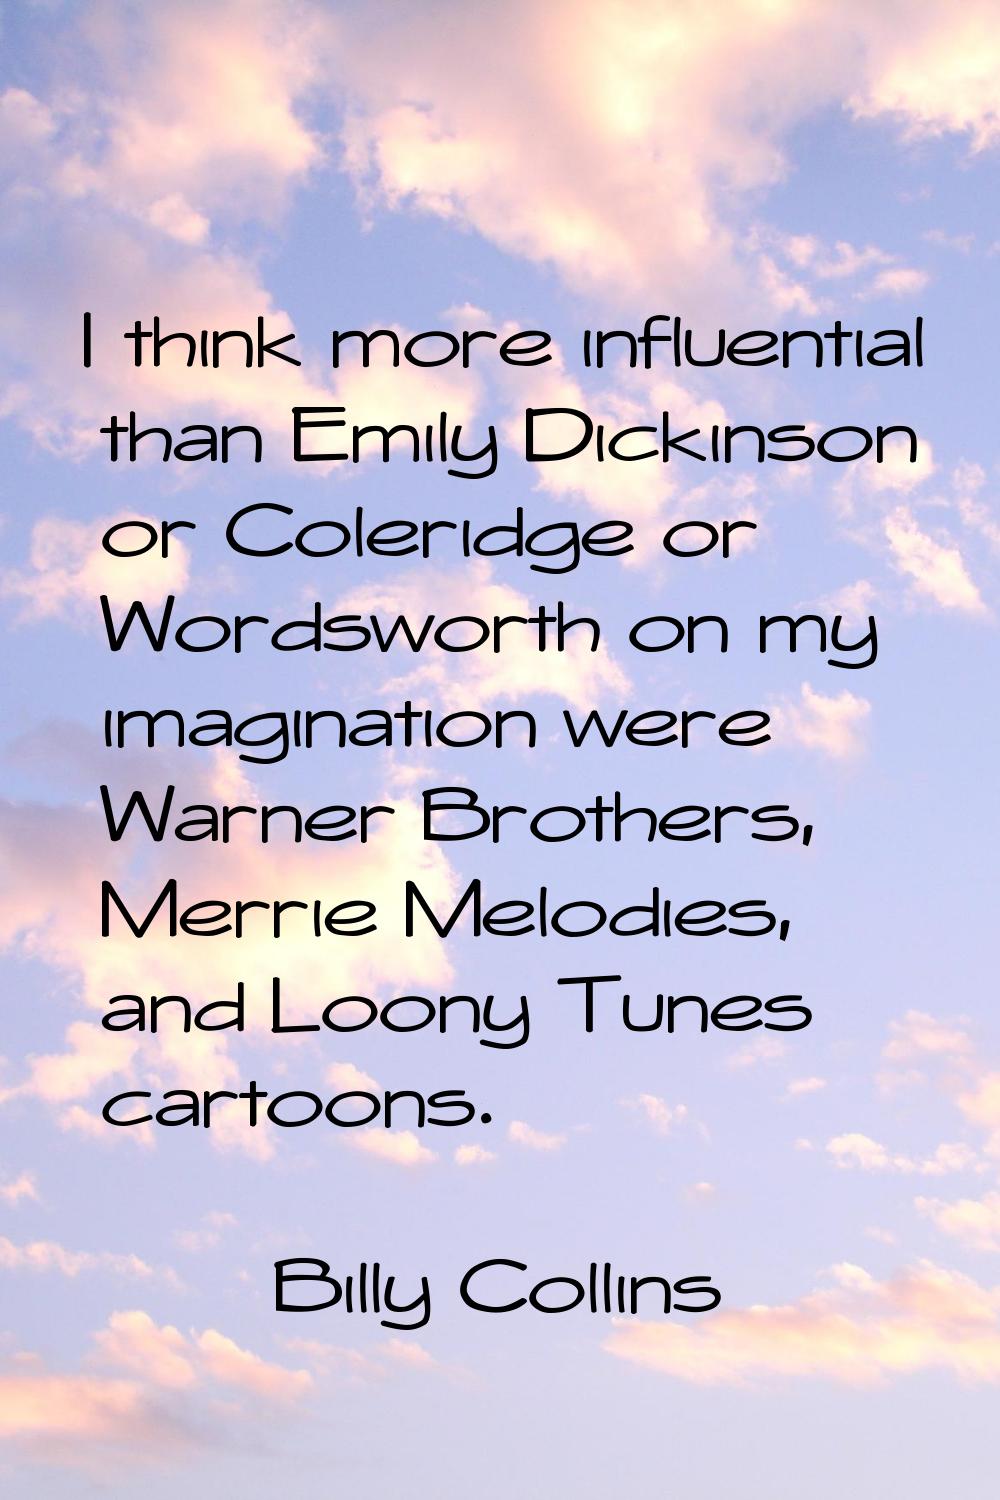 I think more influential than Emily Dickinson or Coleridge or Wordsworth on my imagination were War